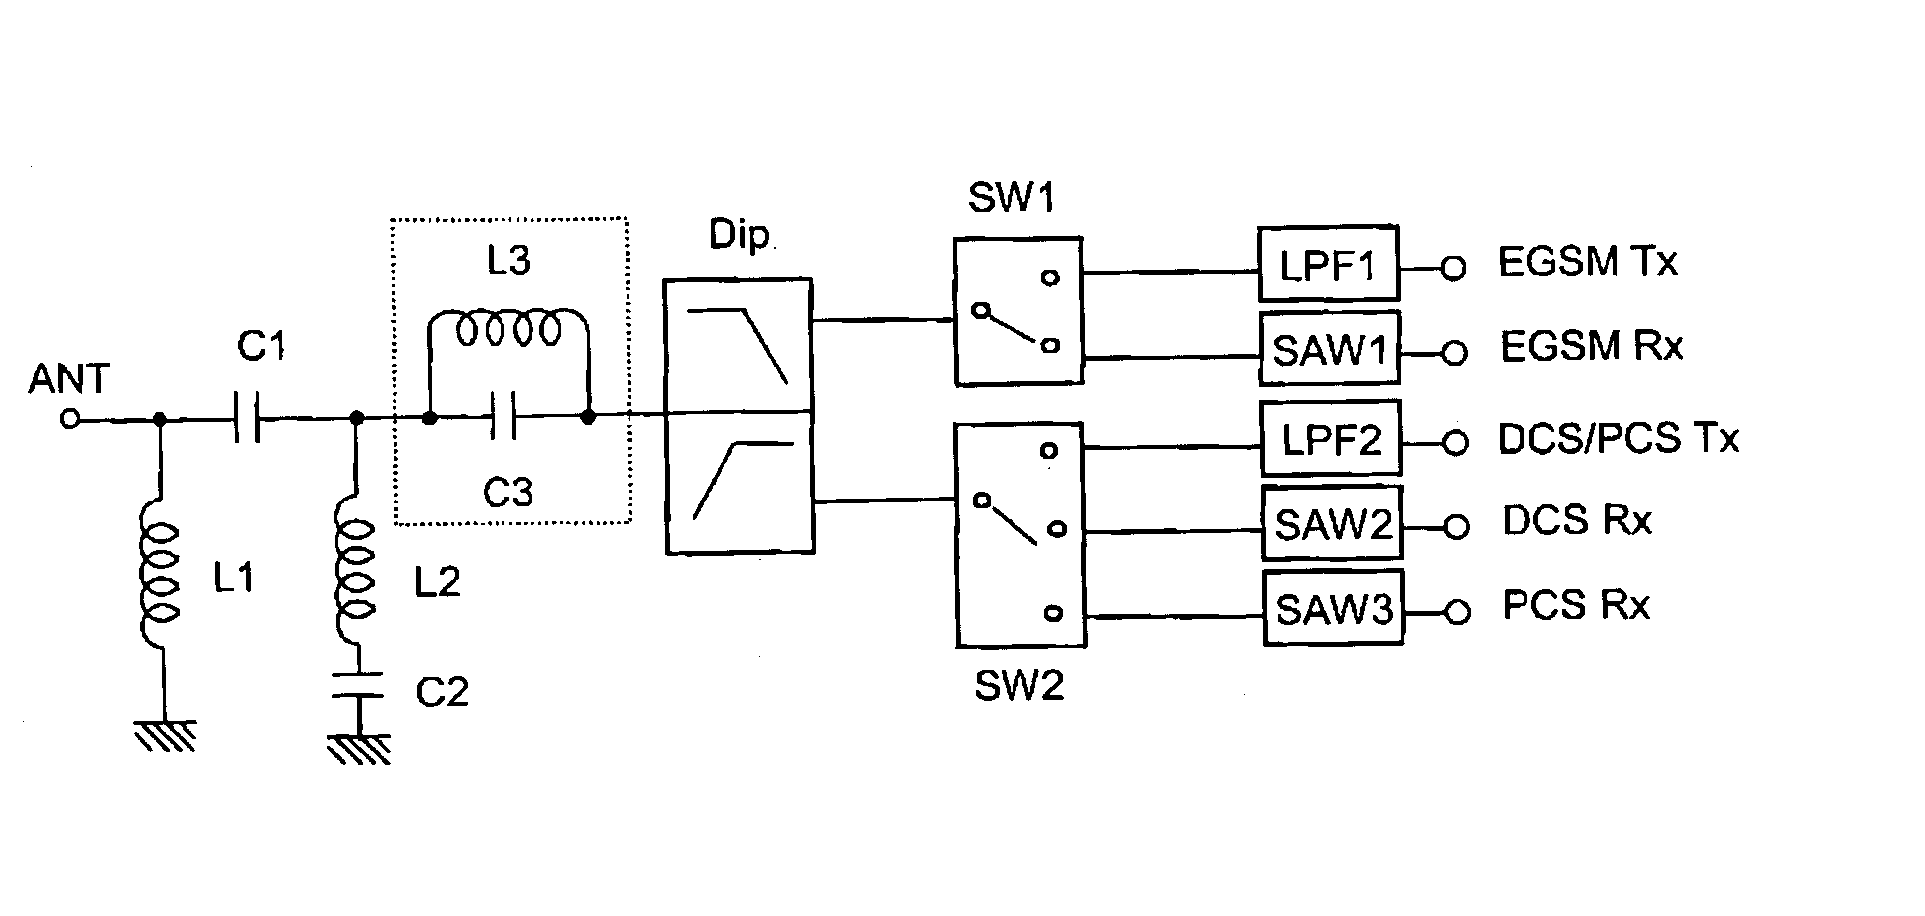 Bypass filter, multi-band antenna switch circuit, and layered module composite part and communication device using them